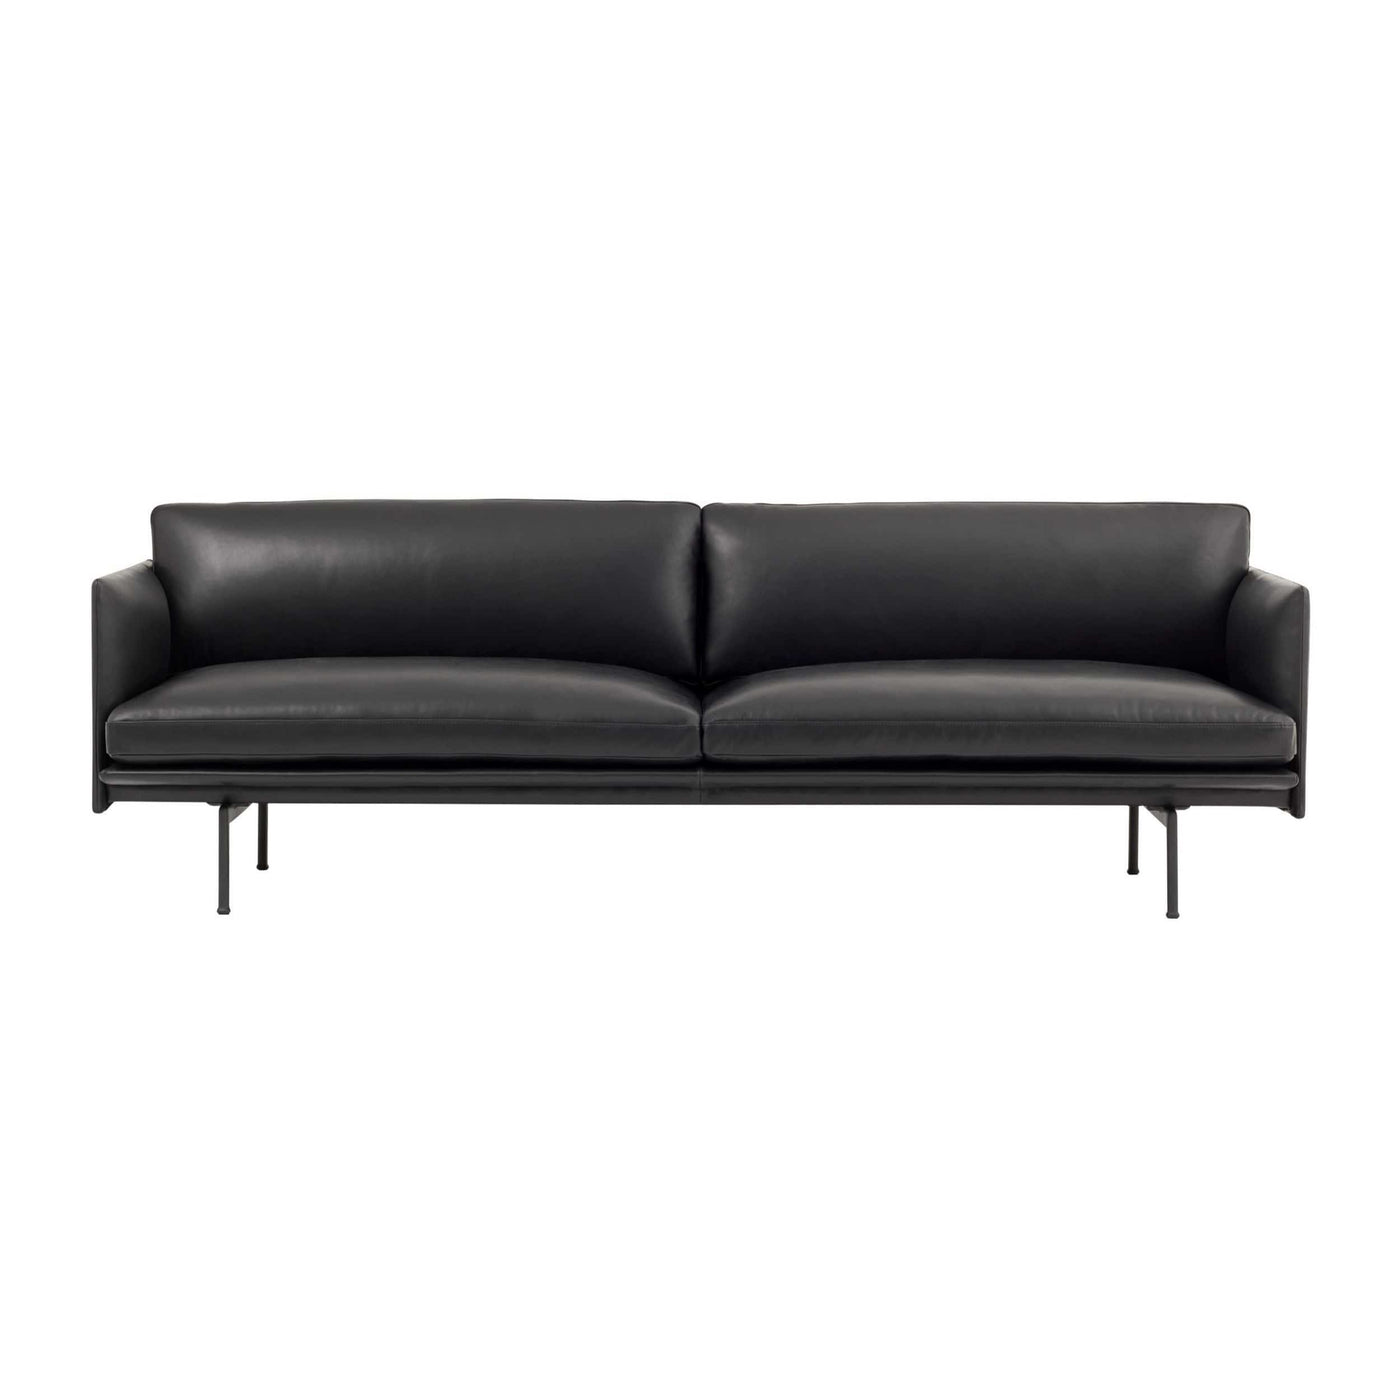 Muuto Outline 3 seater sofa with black legs. Available from someday designs. #colour_black-refine-leather